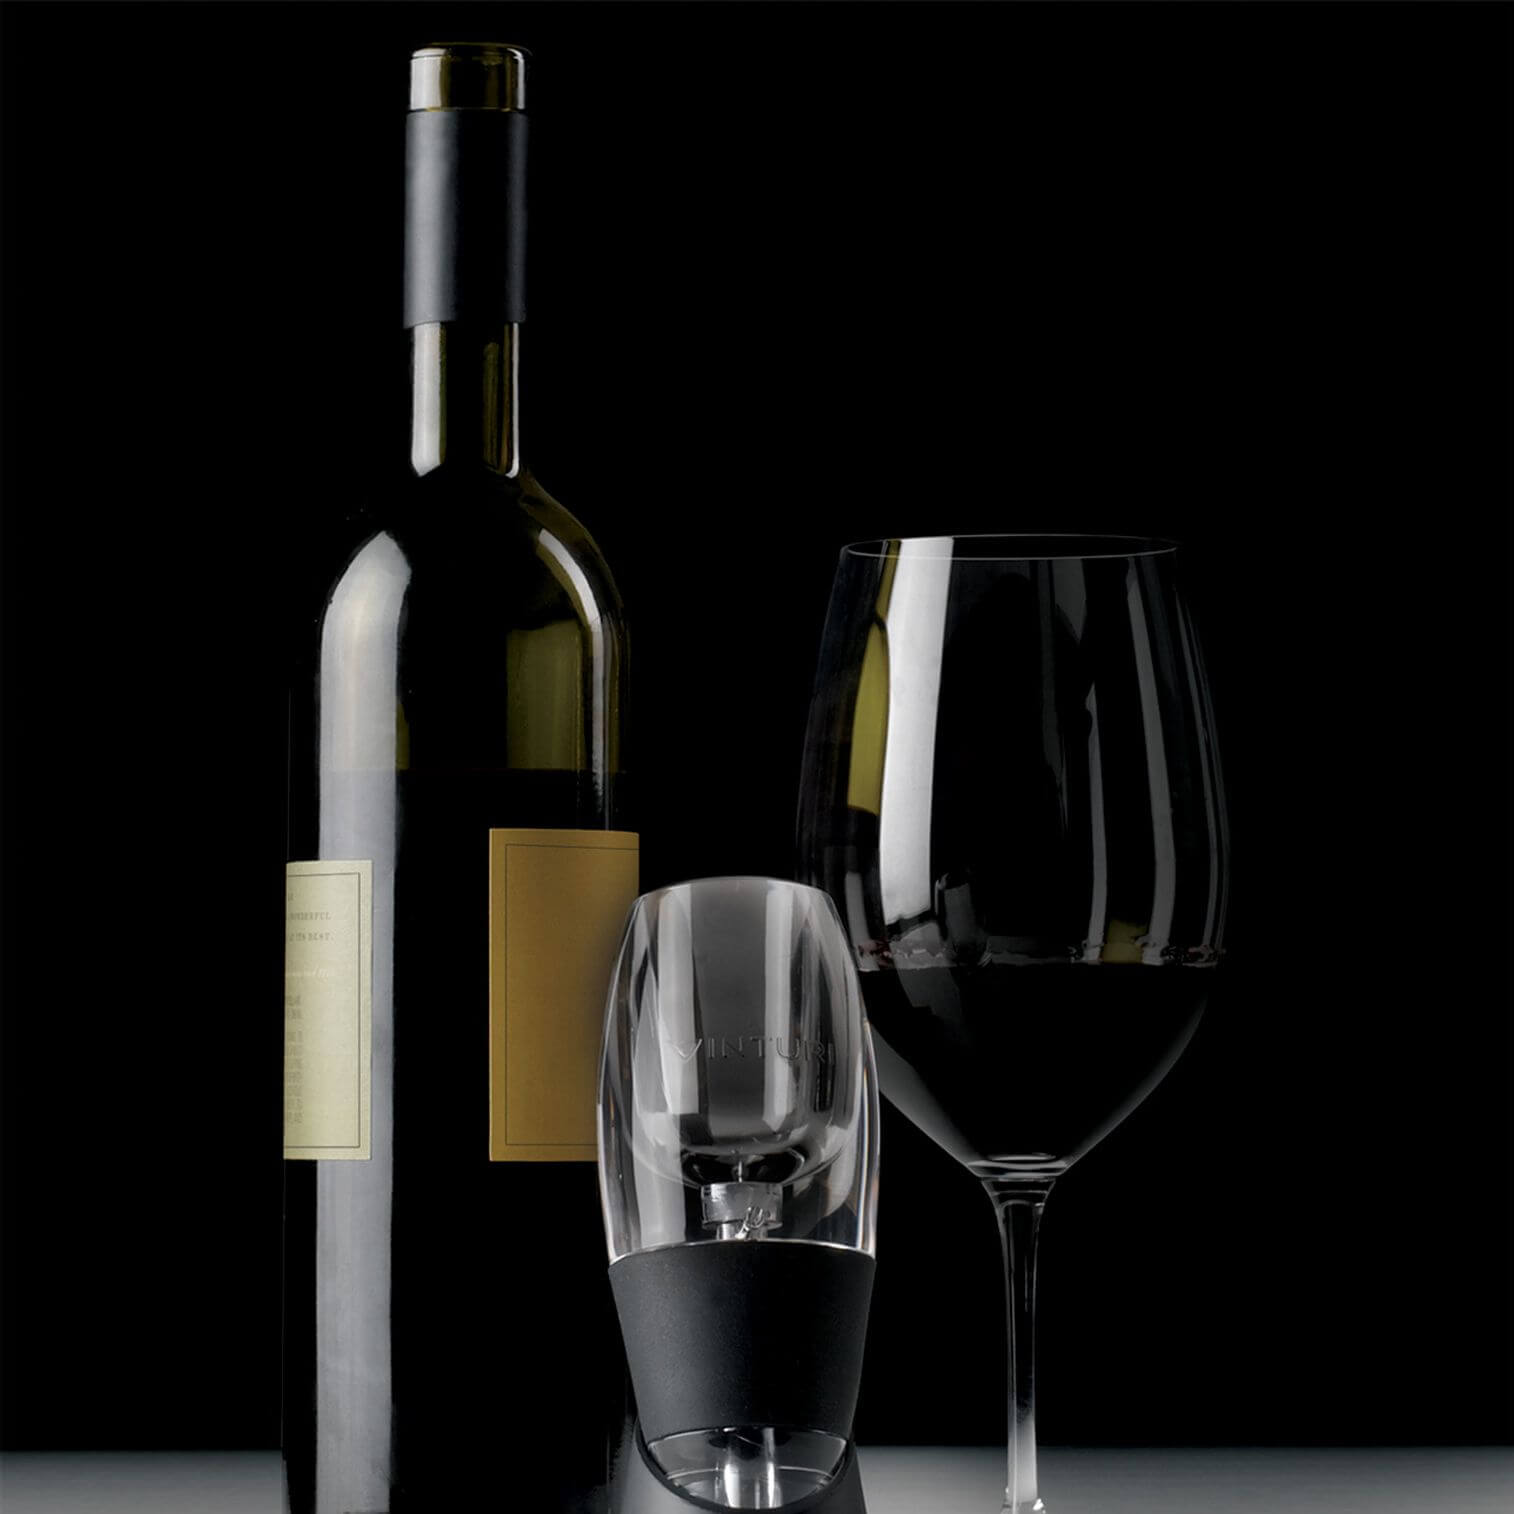 A wine bottle and glass next to a wine aerator